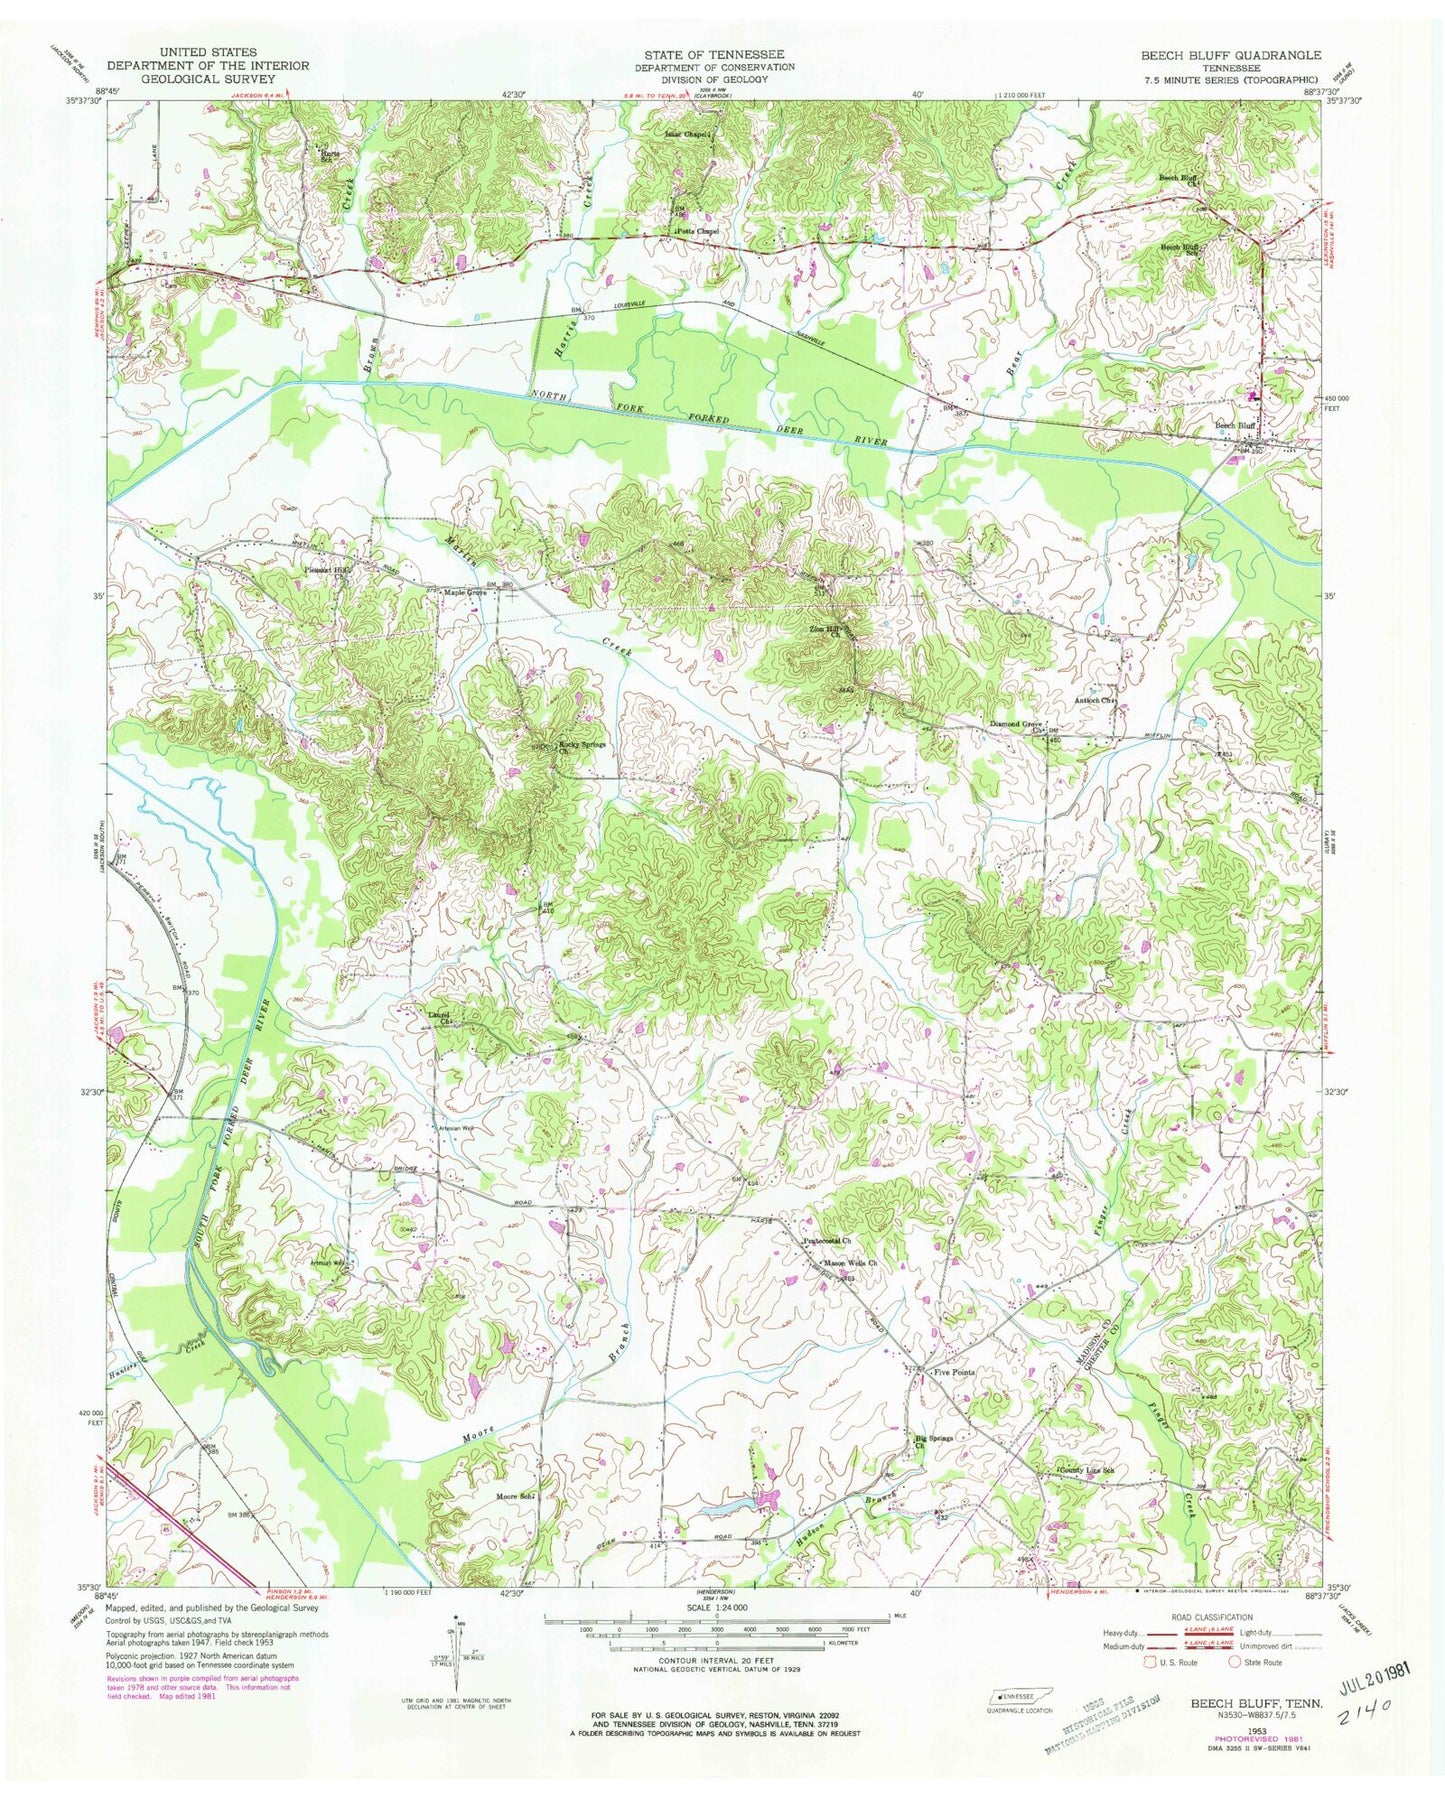 Classic USGS Beech Bluff Tennessee 7.5'x7.5' Topo Map Image